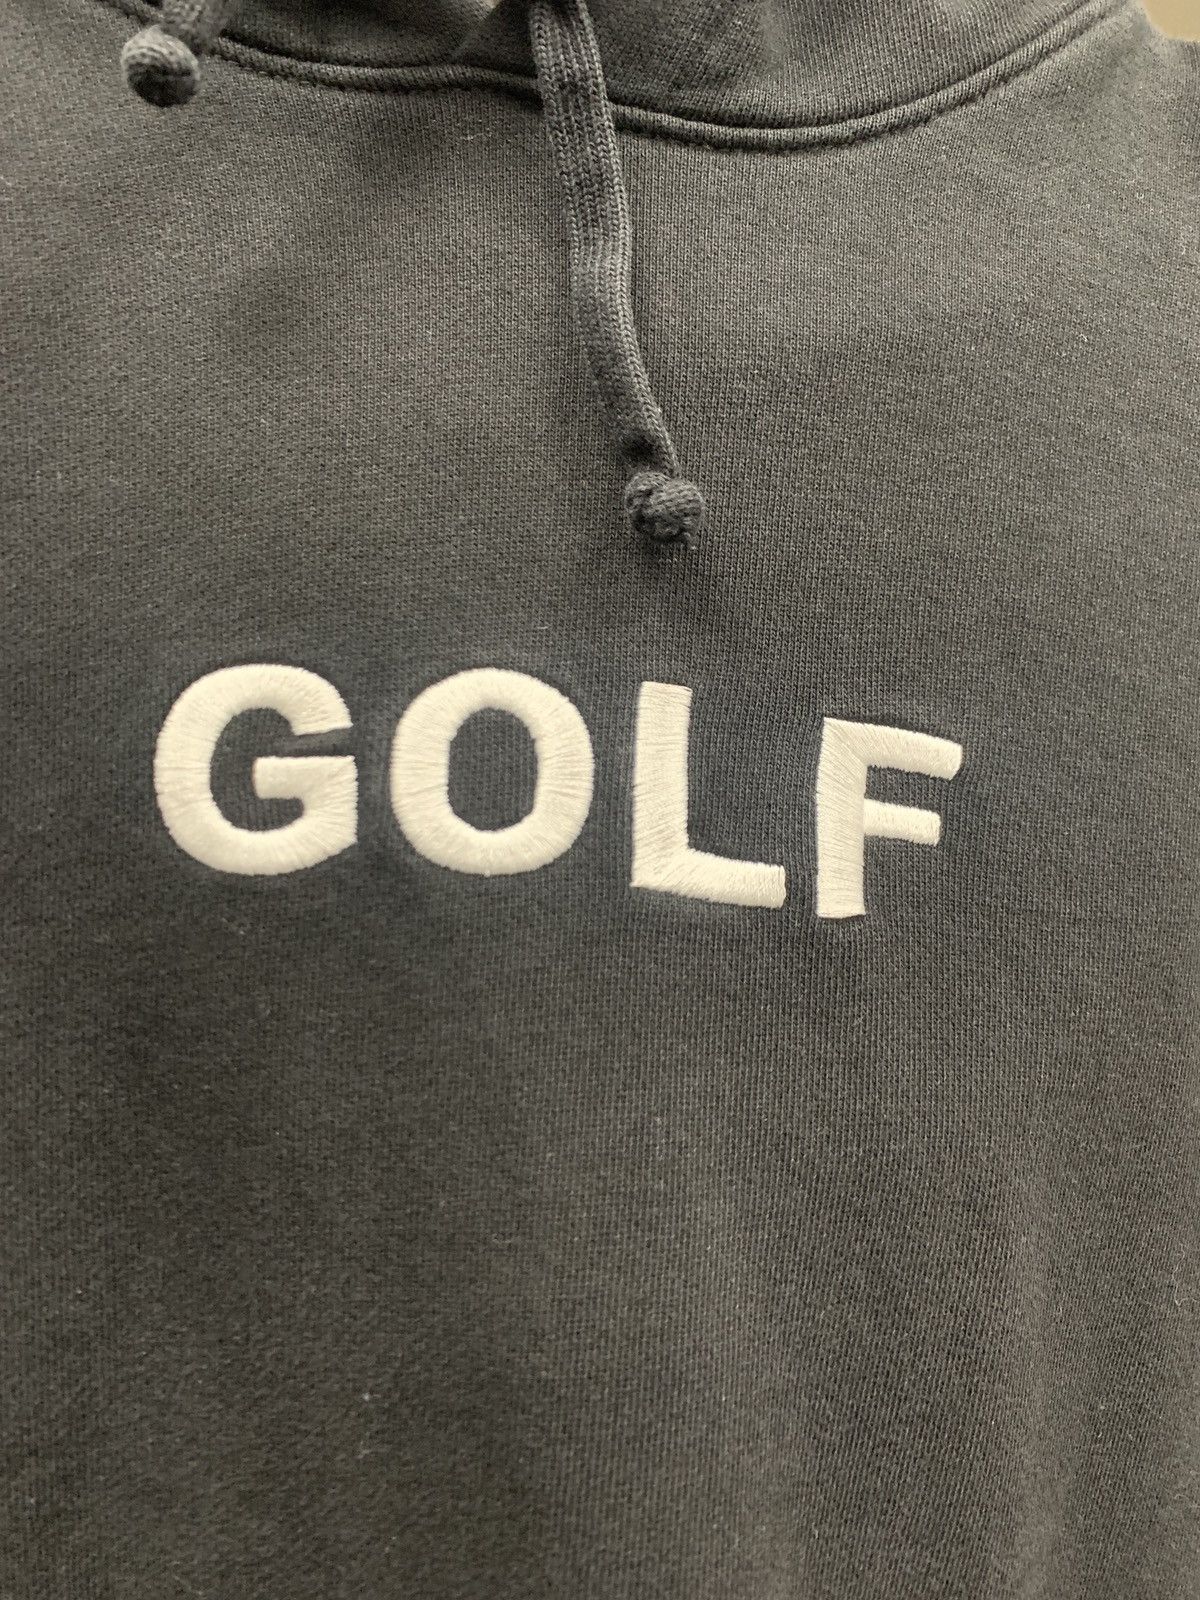 Golf Wang Golf Wang embroidered hoodie black pullover small basic Size US S / EU 44-46 / 1 - 2 Preview